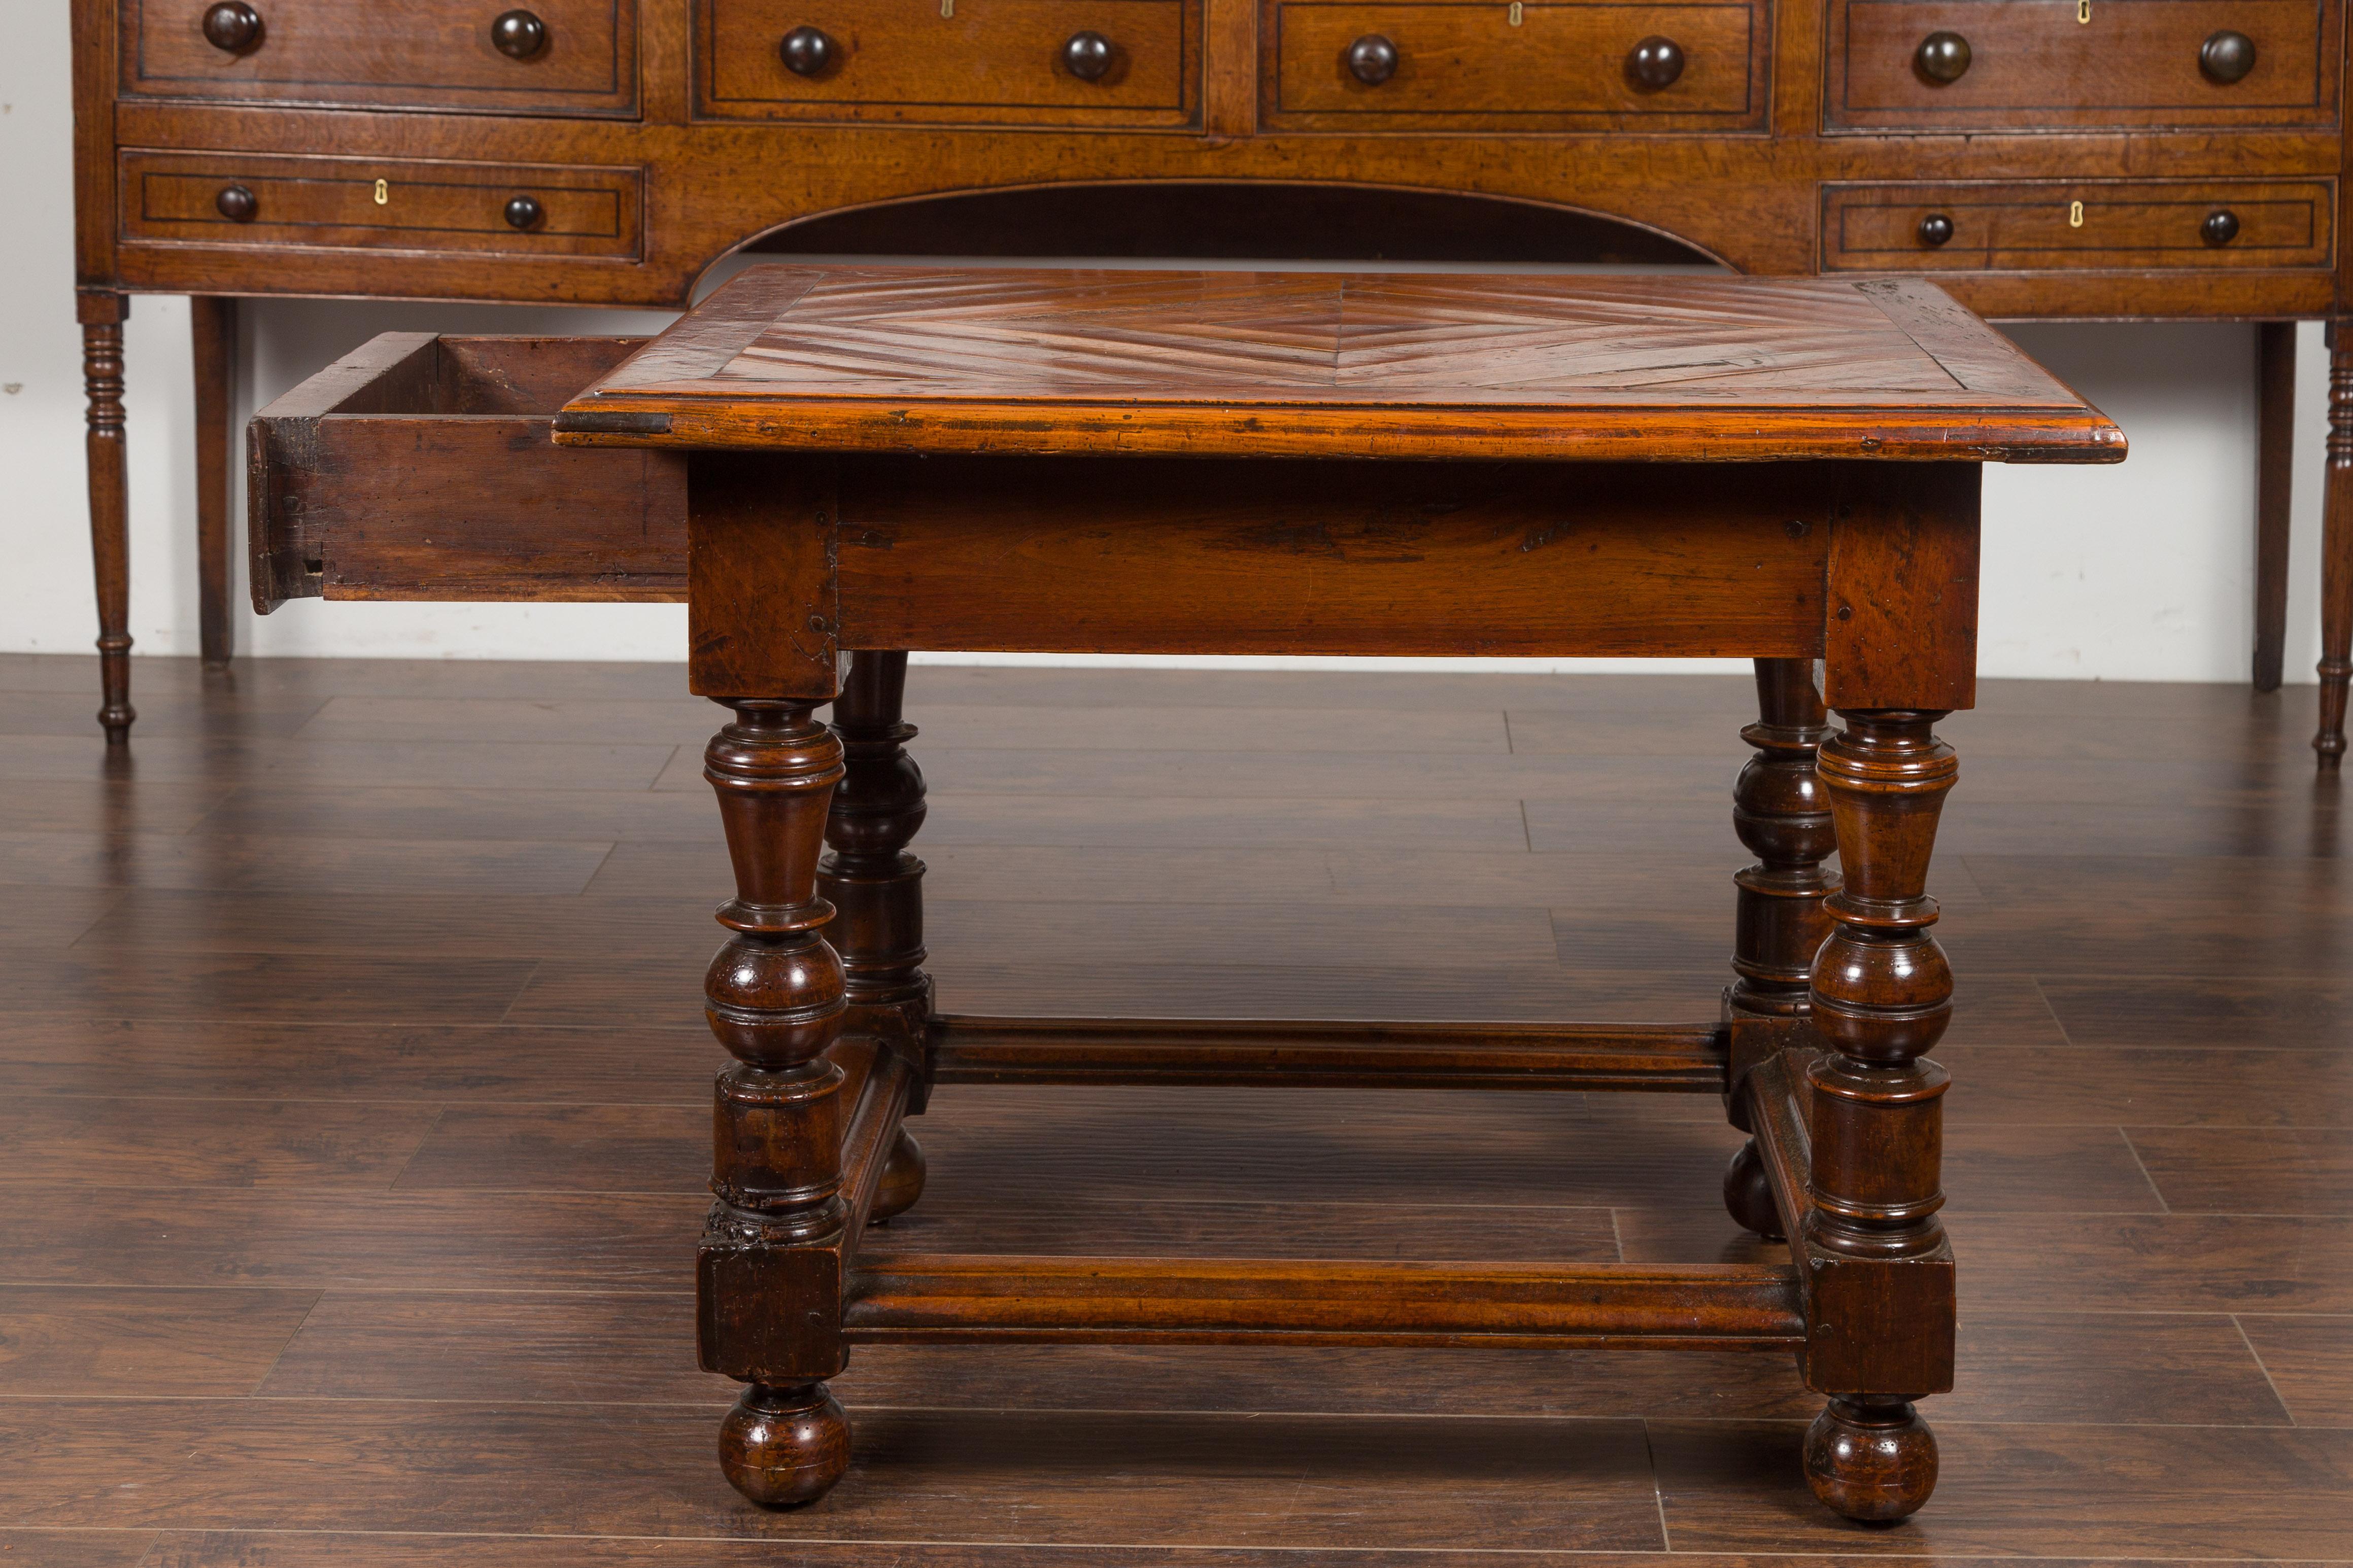 English 1850s Walnut Parquet Top Table with Single Drawer and Turned Legs For Sale 4